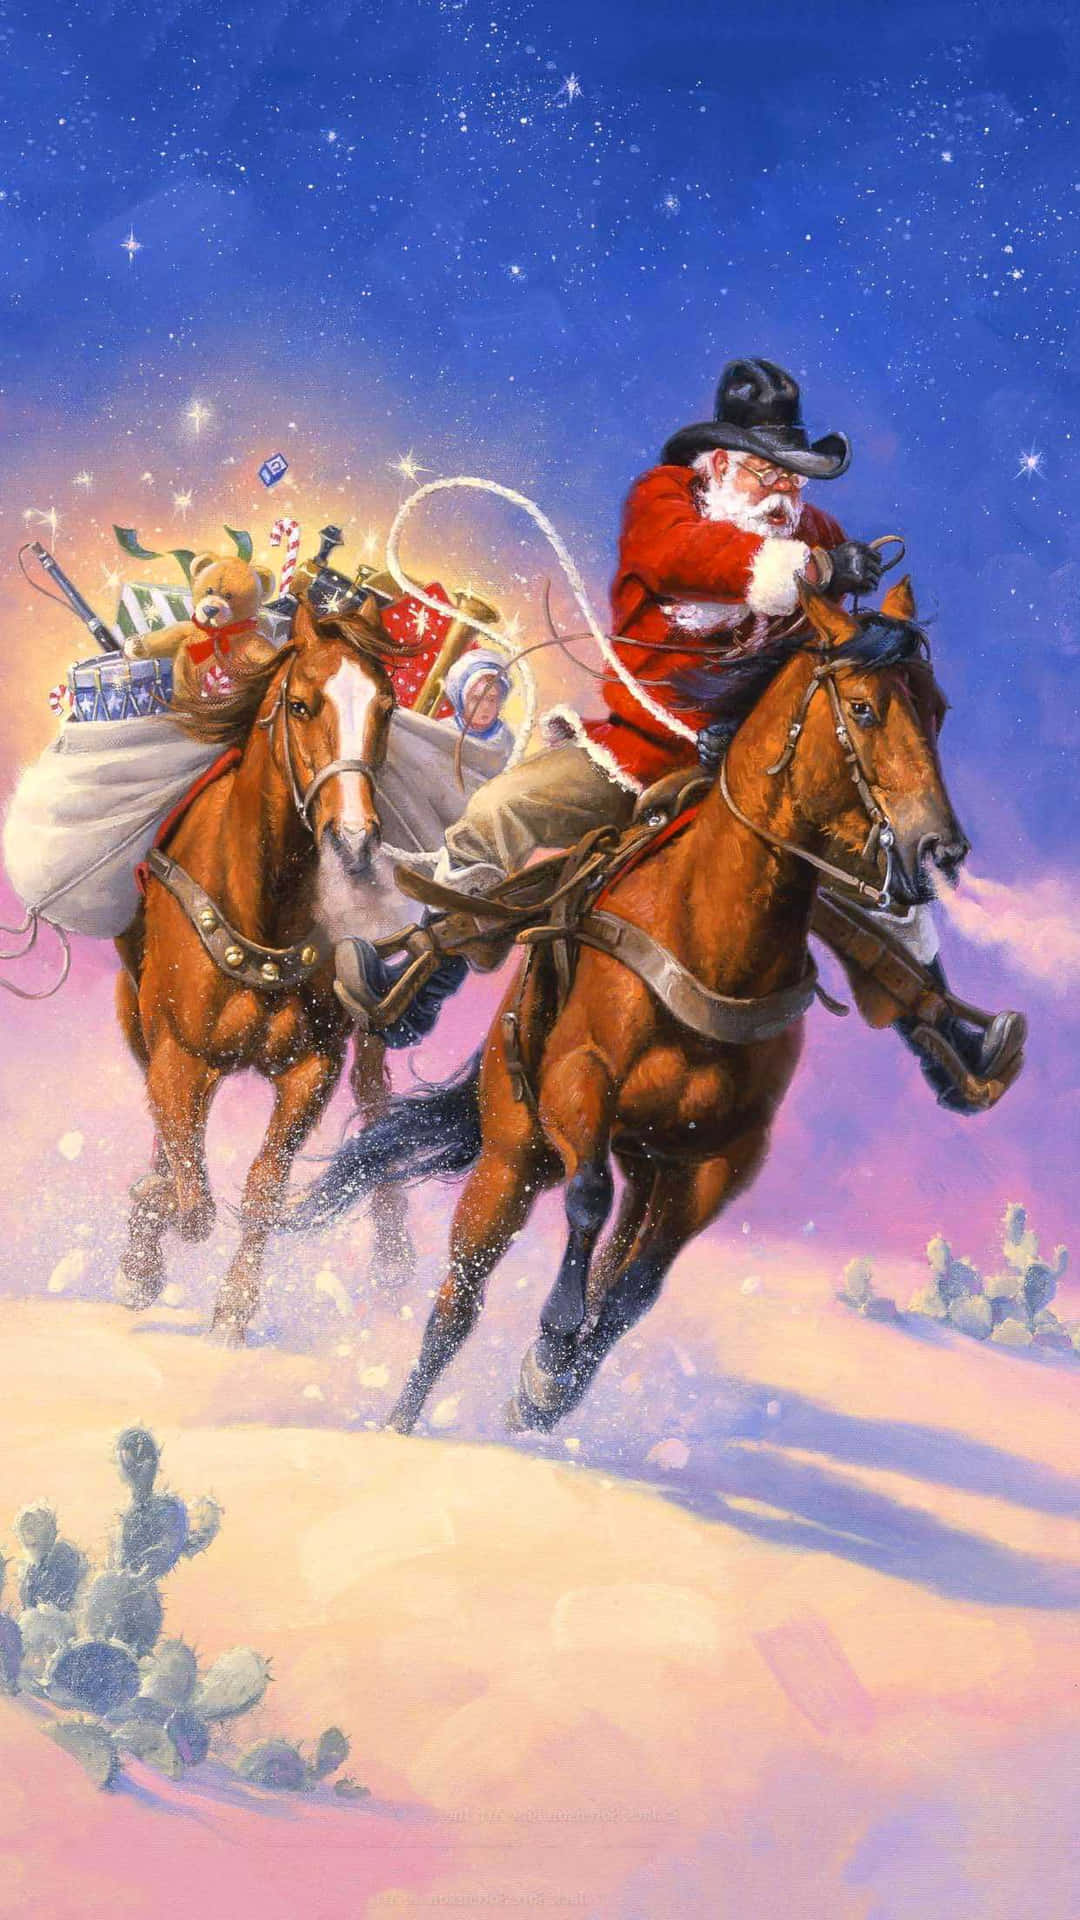 "Merry Christmas from the Cowboy's Ranch" Wallpaper